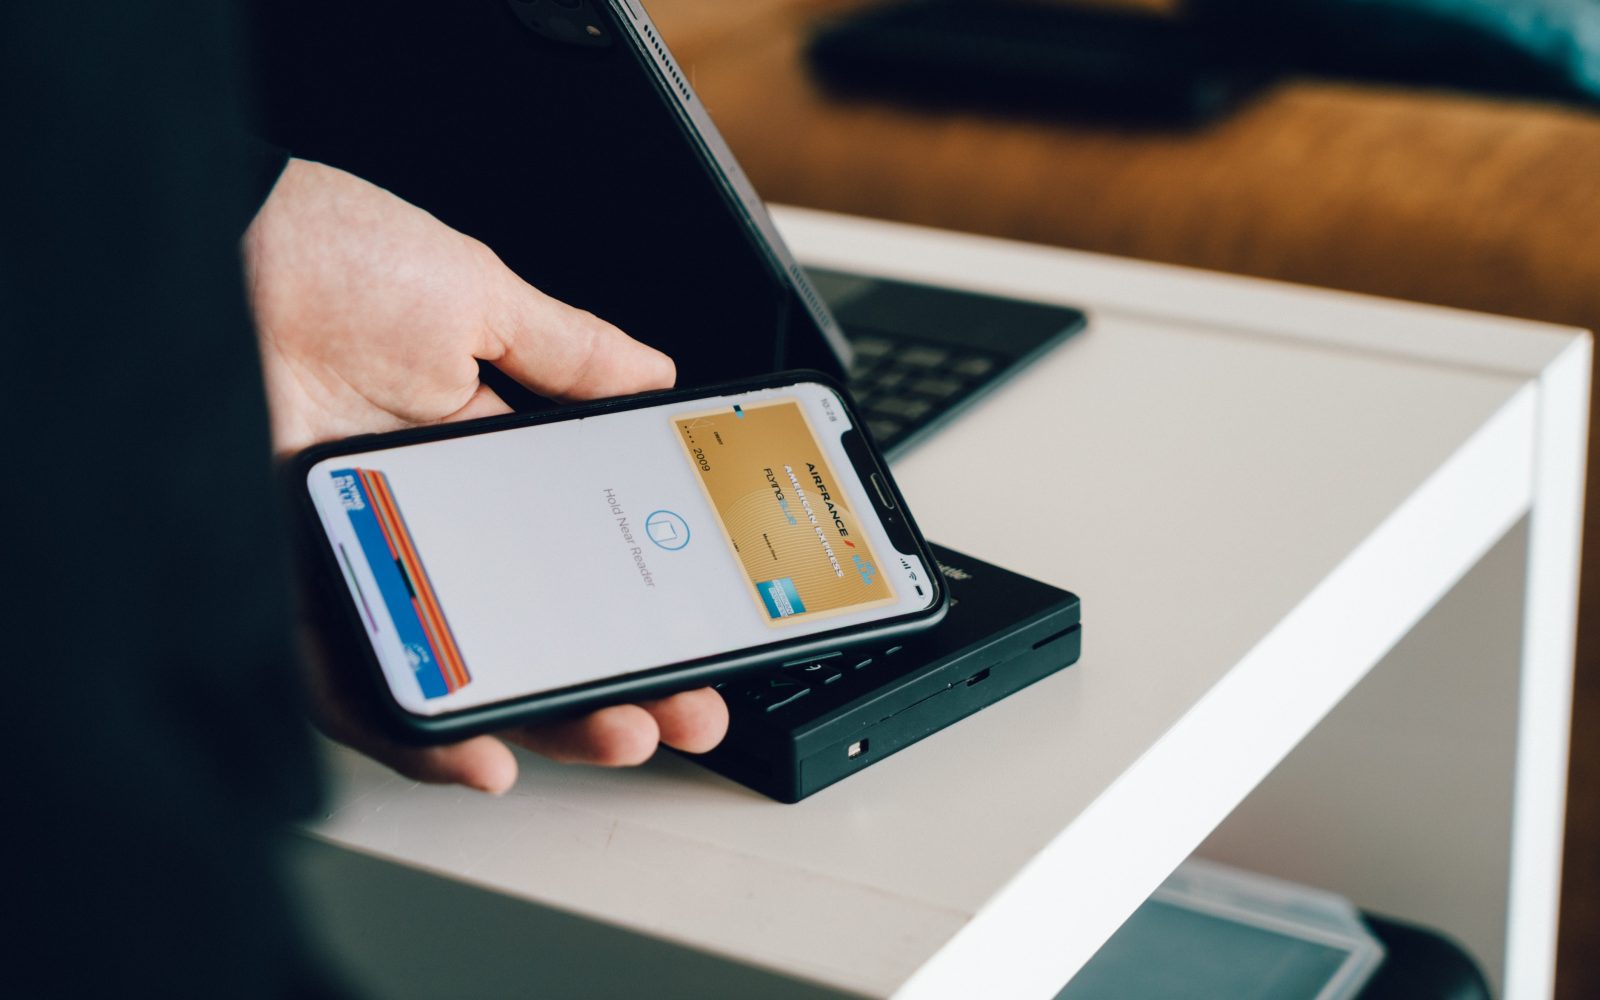 Cropped image of man's hands holding a smartphone and doing a payment by using a NFC technology 